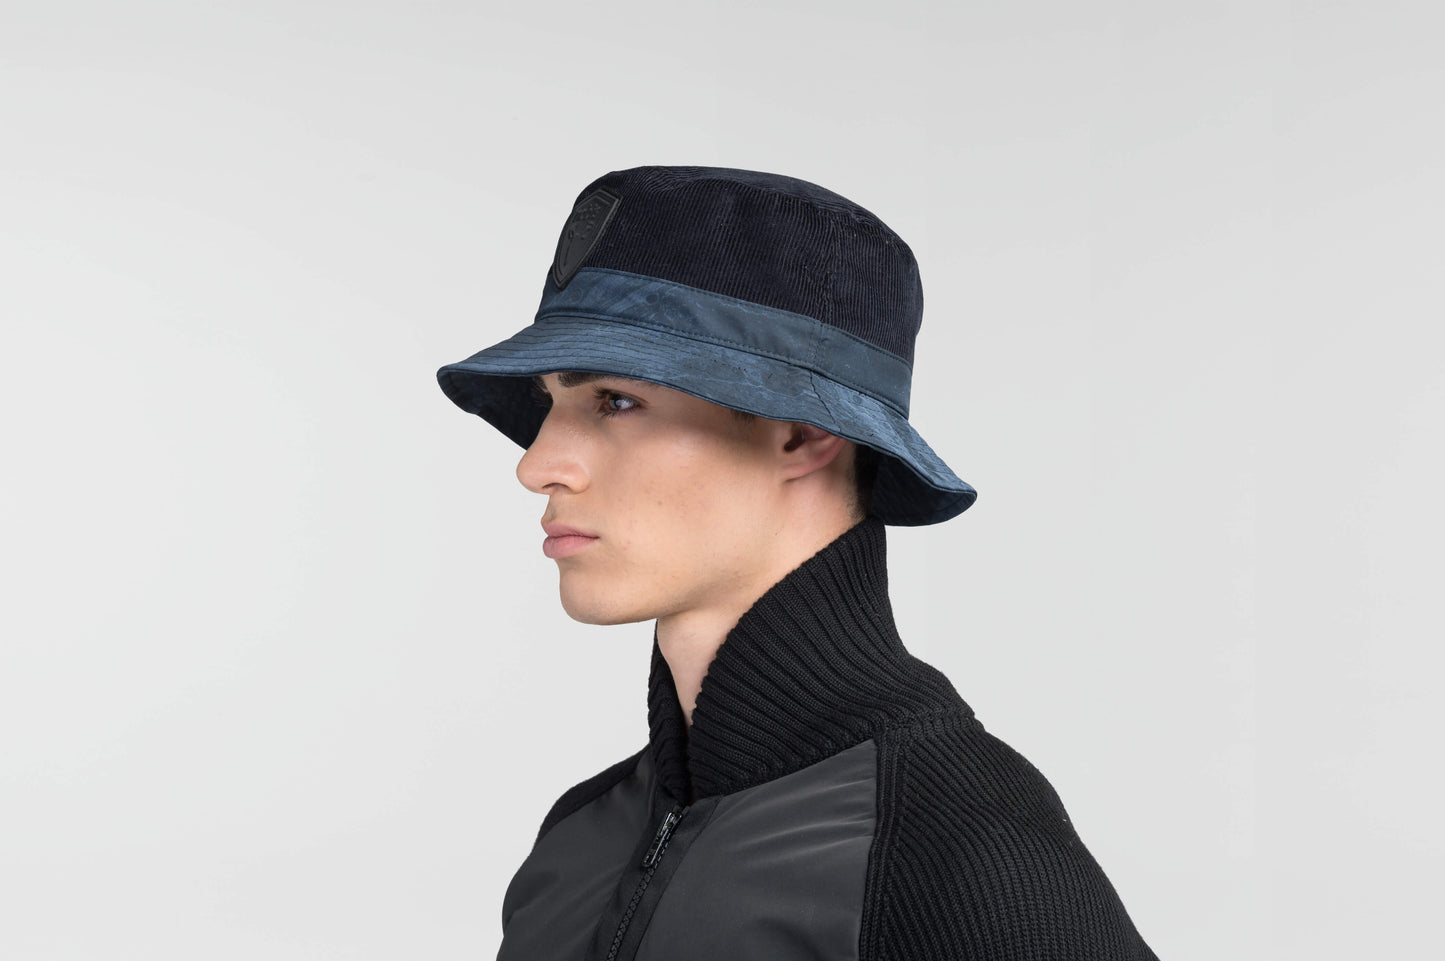 Kaia Unisex Tailored Bucket Hat in a 100% cotton corduroy and 3-ply micro denier fabrication, unstructured crown, black leather Nobis shield logo on crown front, and small flap pocket on the right side crown, in Navy